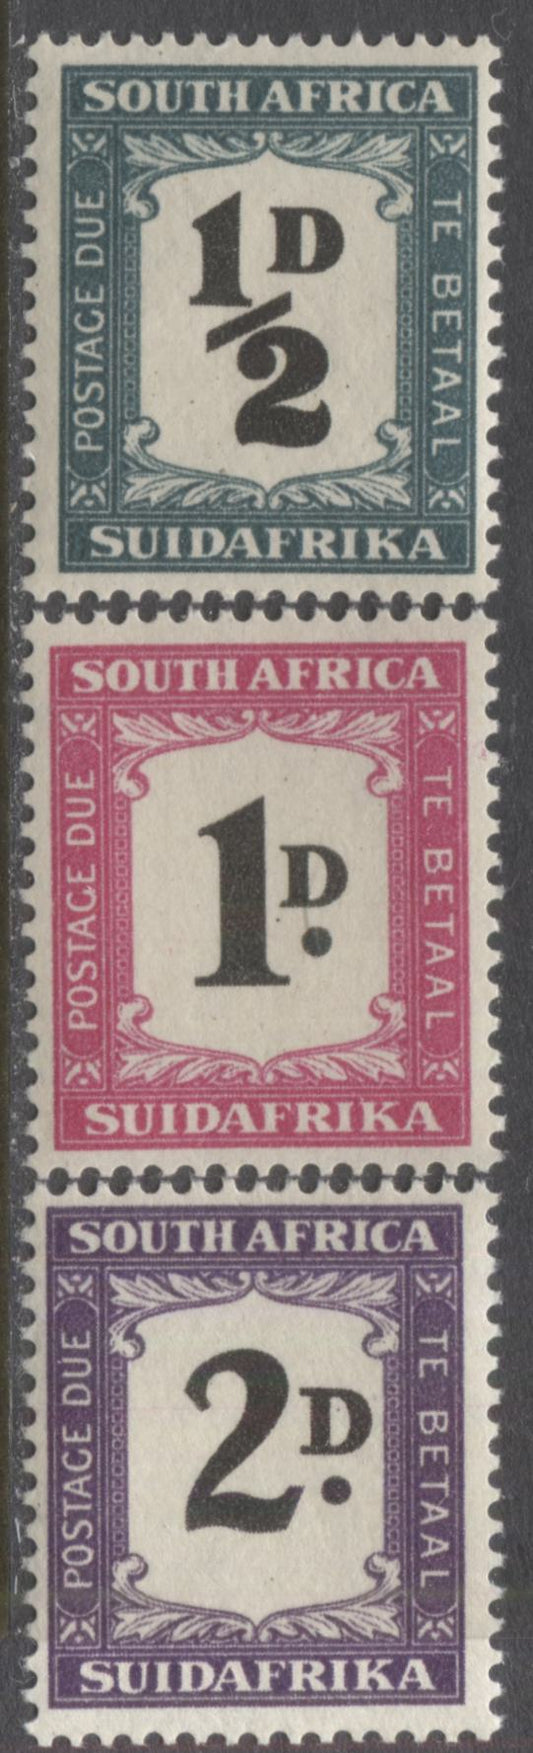 Lot 87 South Africa SG#D34-D36, 1948-1949 Rotogravure Bilingual Postage Dues, 3 Fine NH and VFNH Singles, Perf 15 x 14, Mult Springbok's Head Watermark, SG. Cat. 47.00 GBP = $80.84